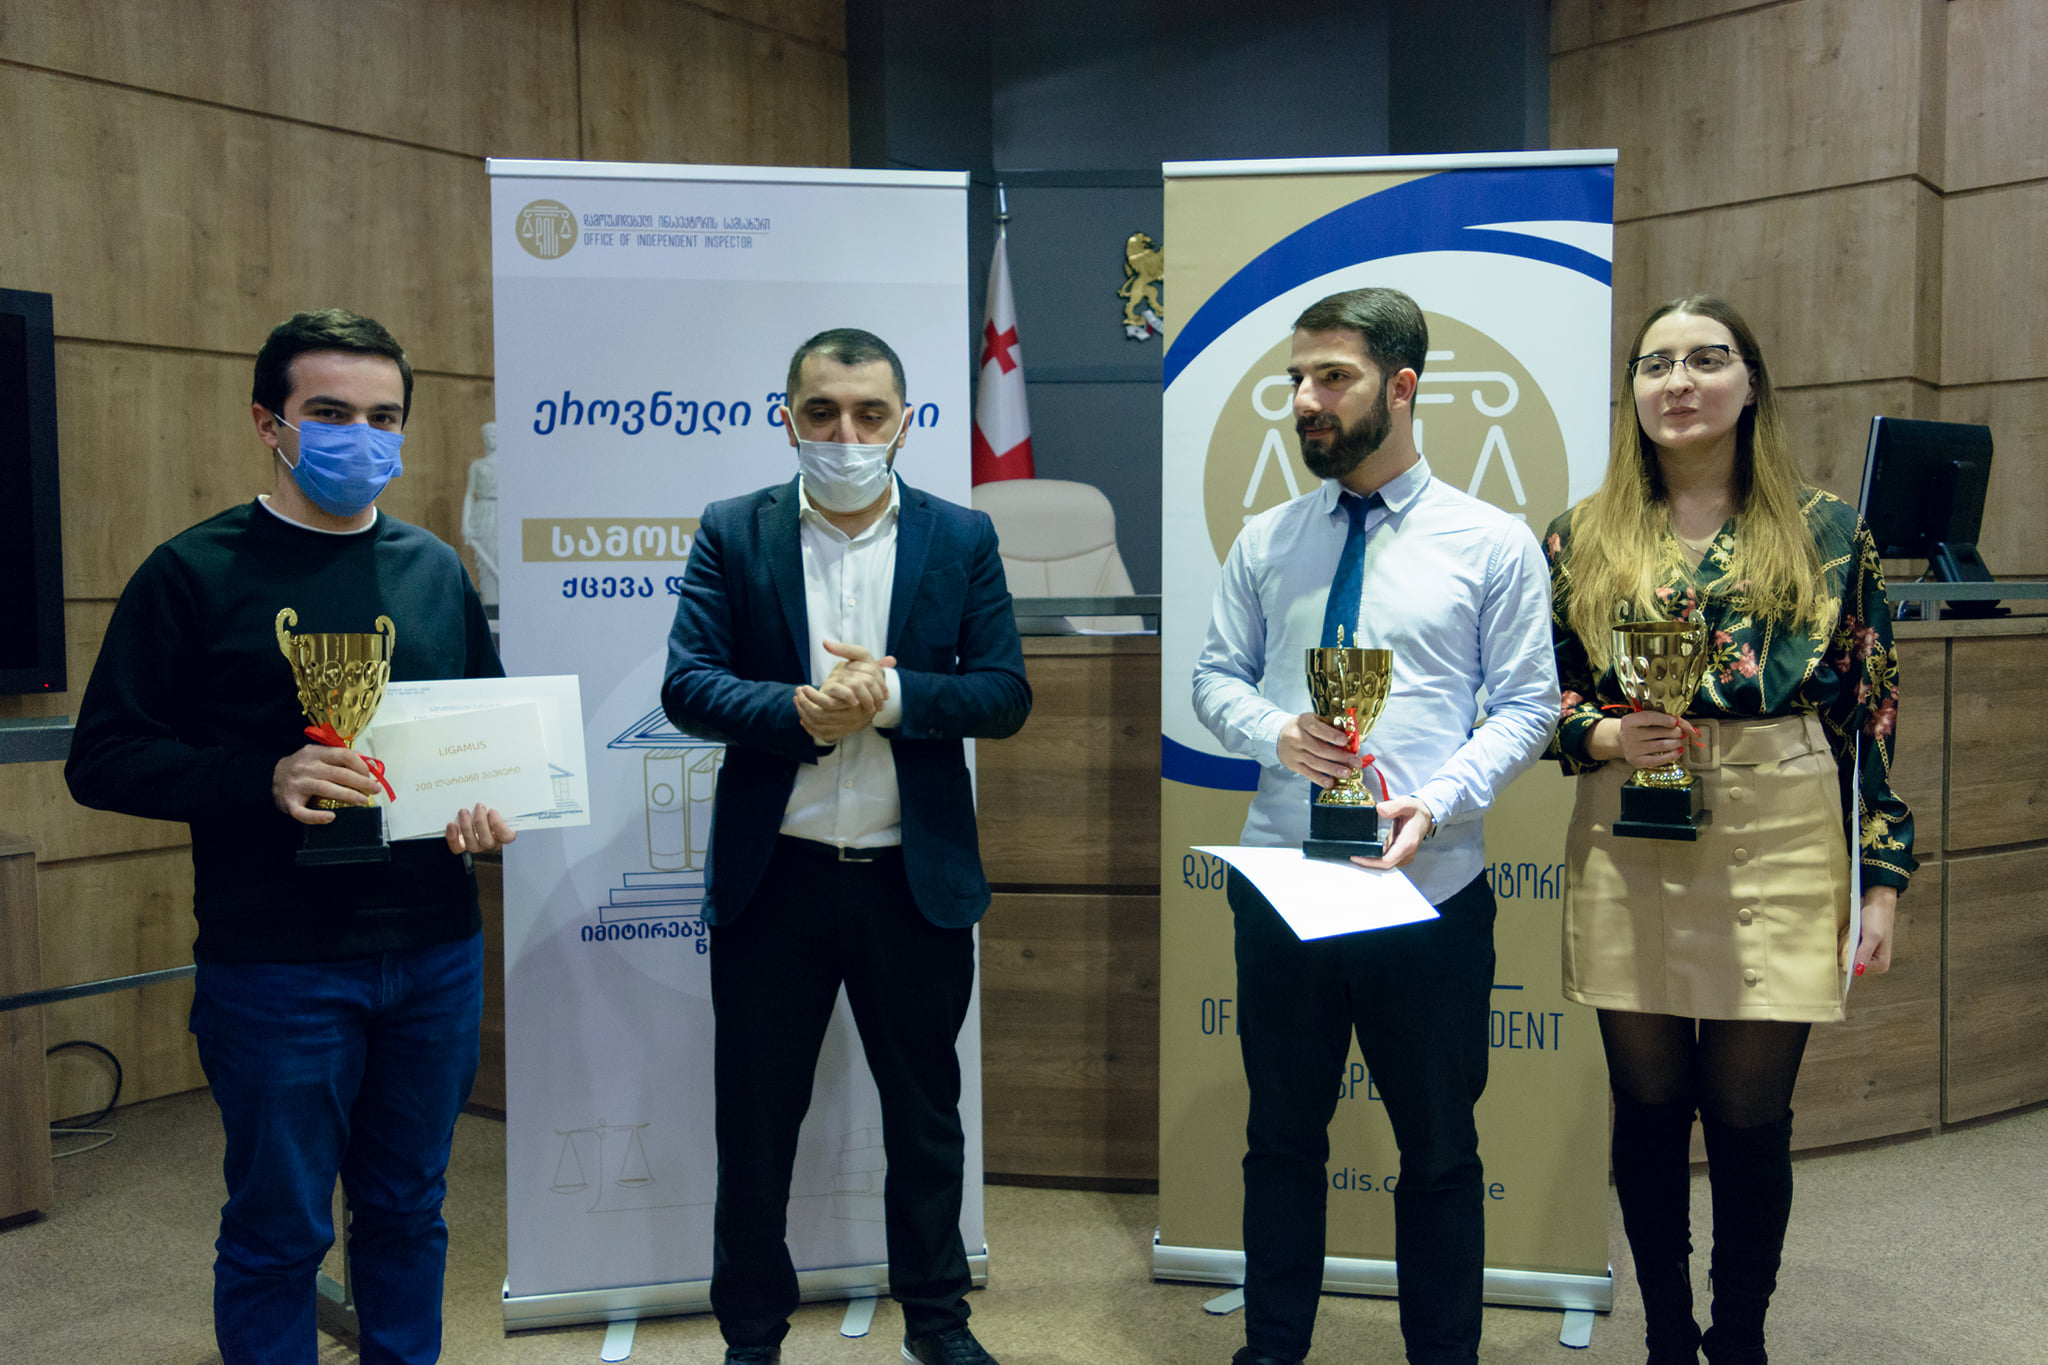 The first national competition “Judicial Conduct and Discipline” is over